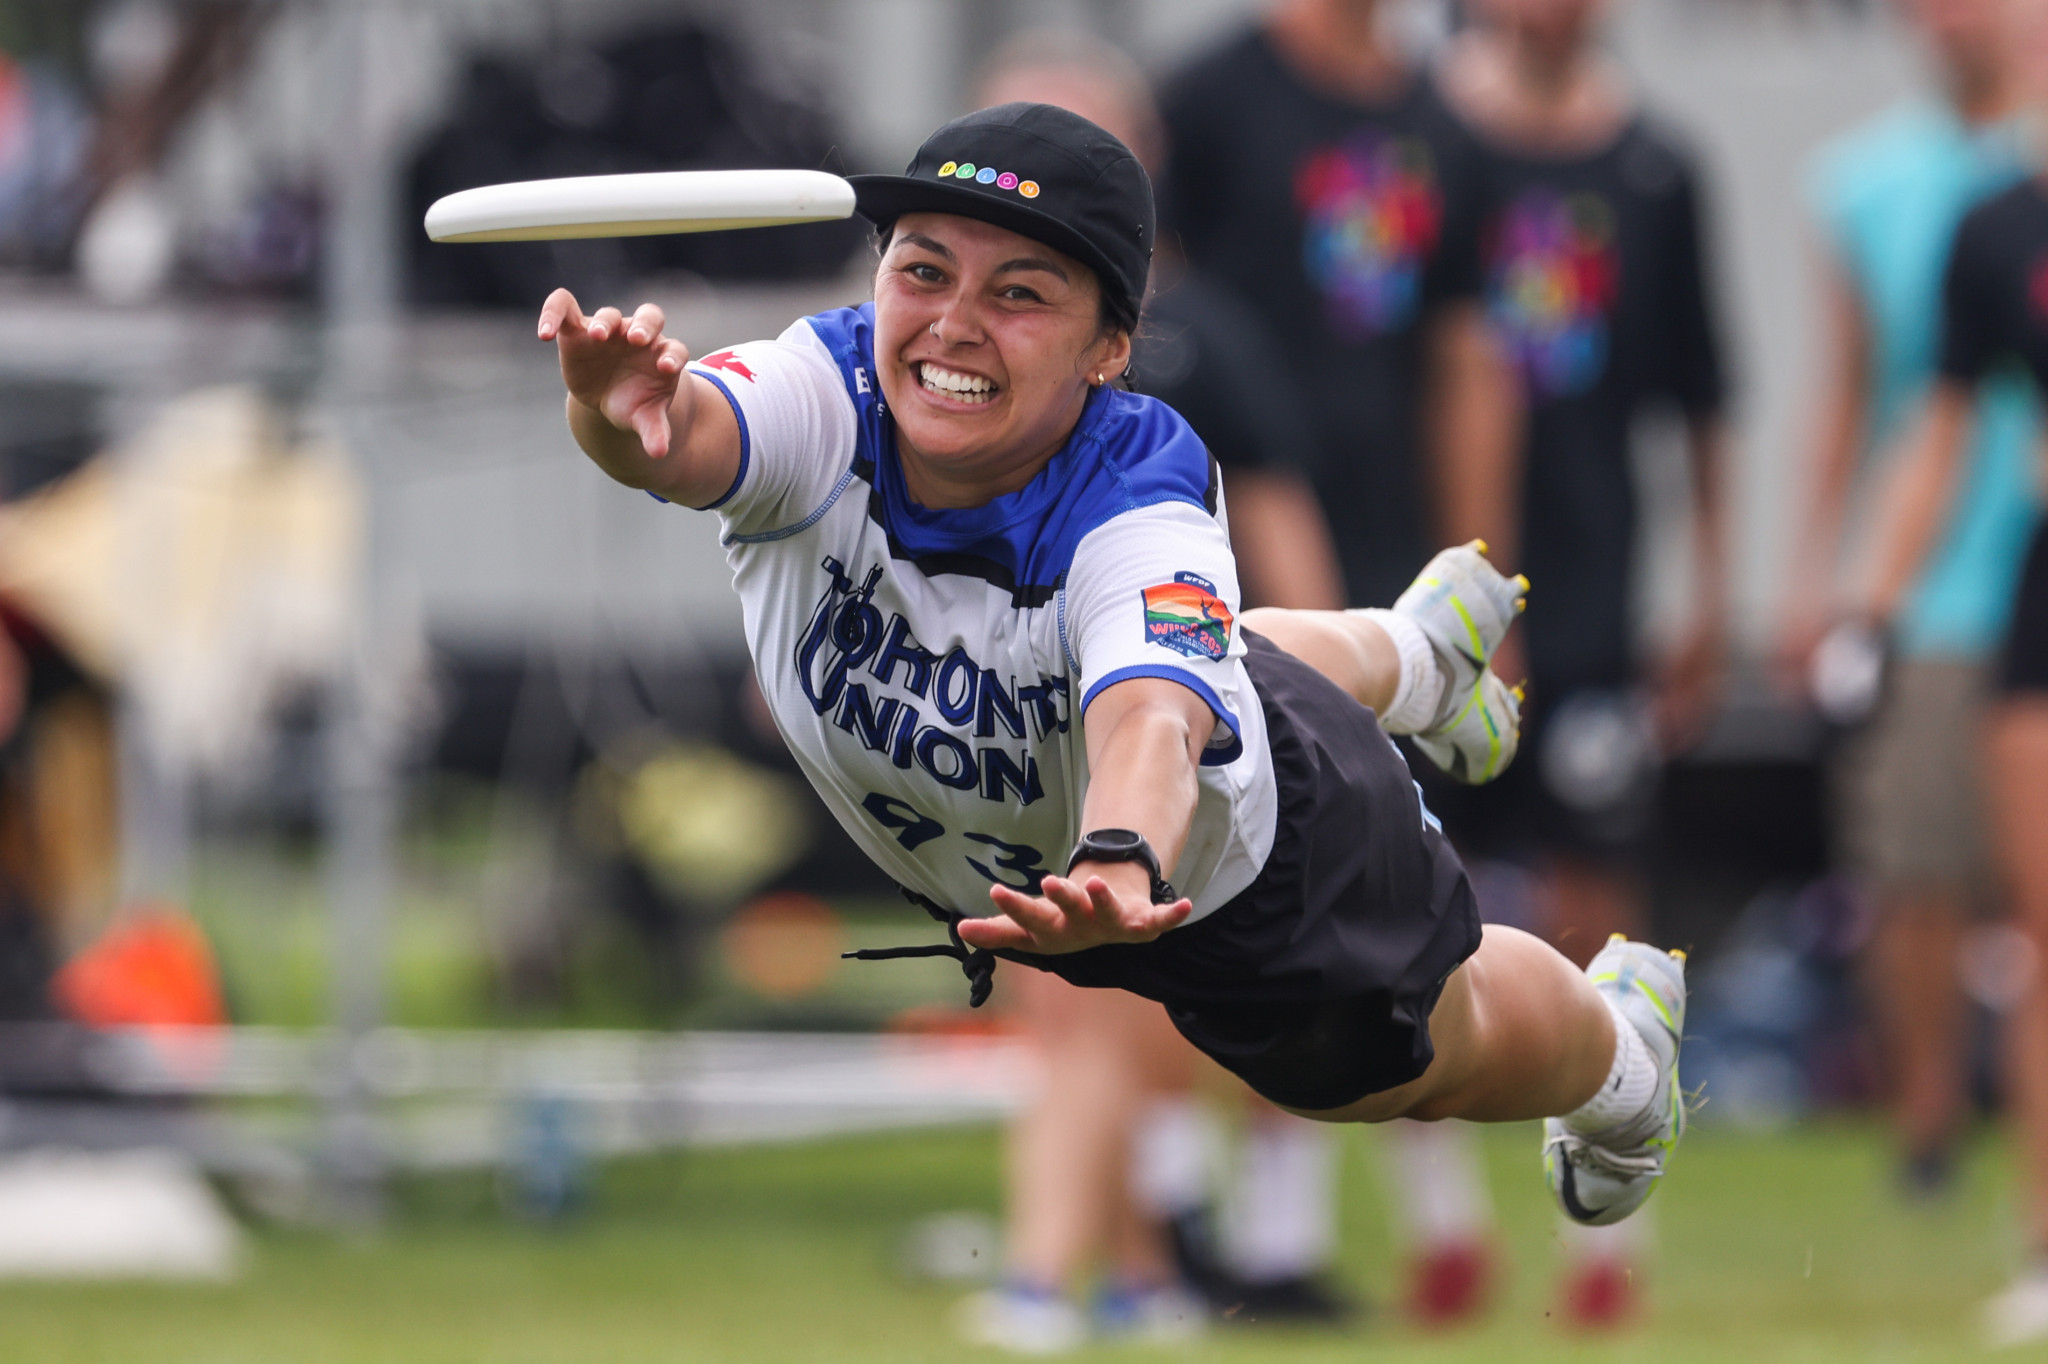 Naomi Redmond of Union used all her energy for the team cause ©Paul Rutherford for UltiPhotos